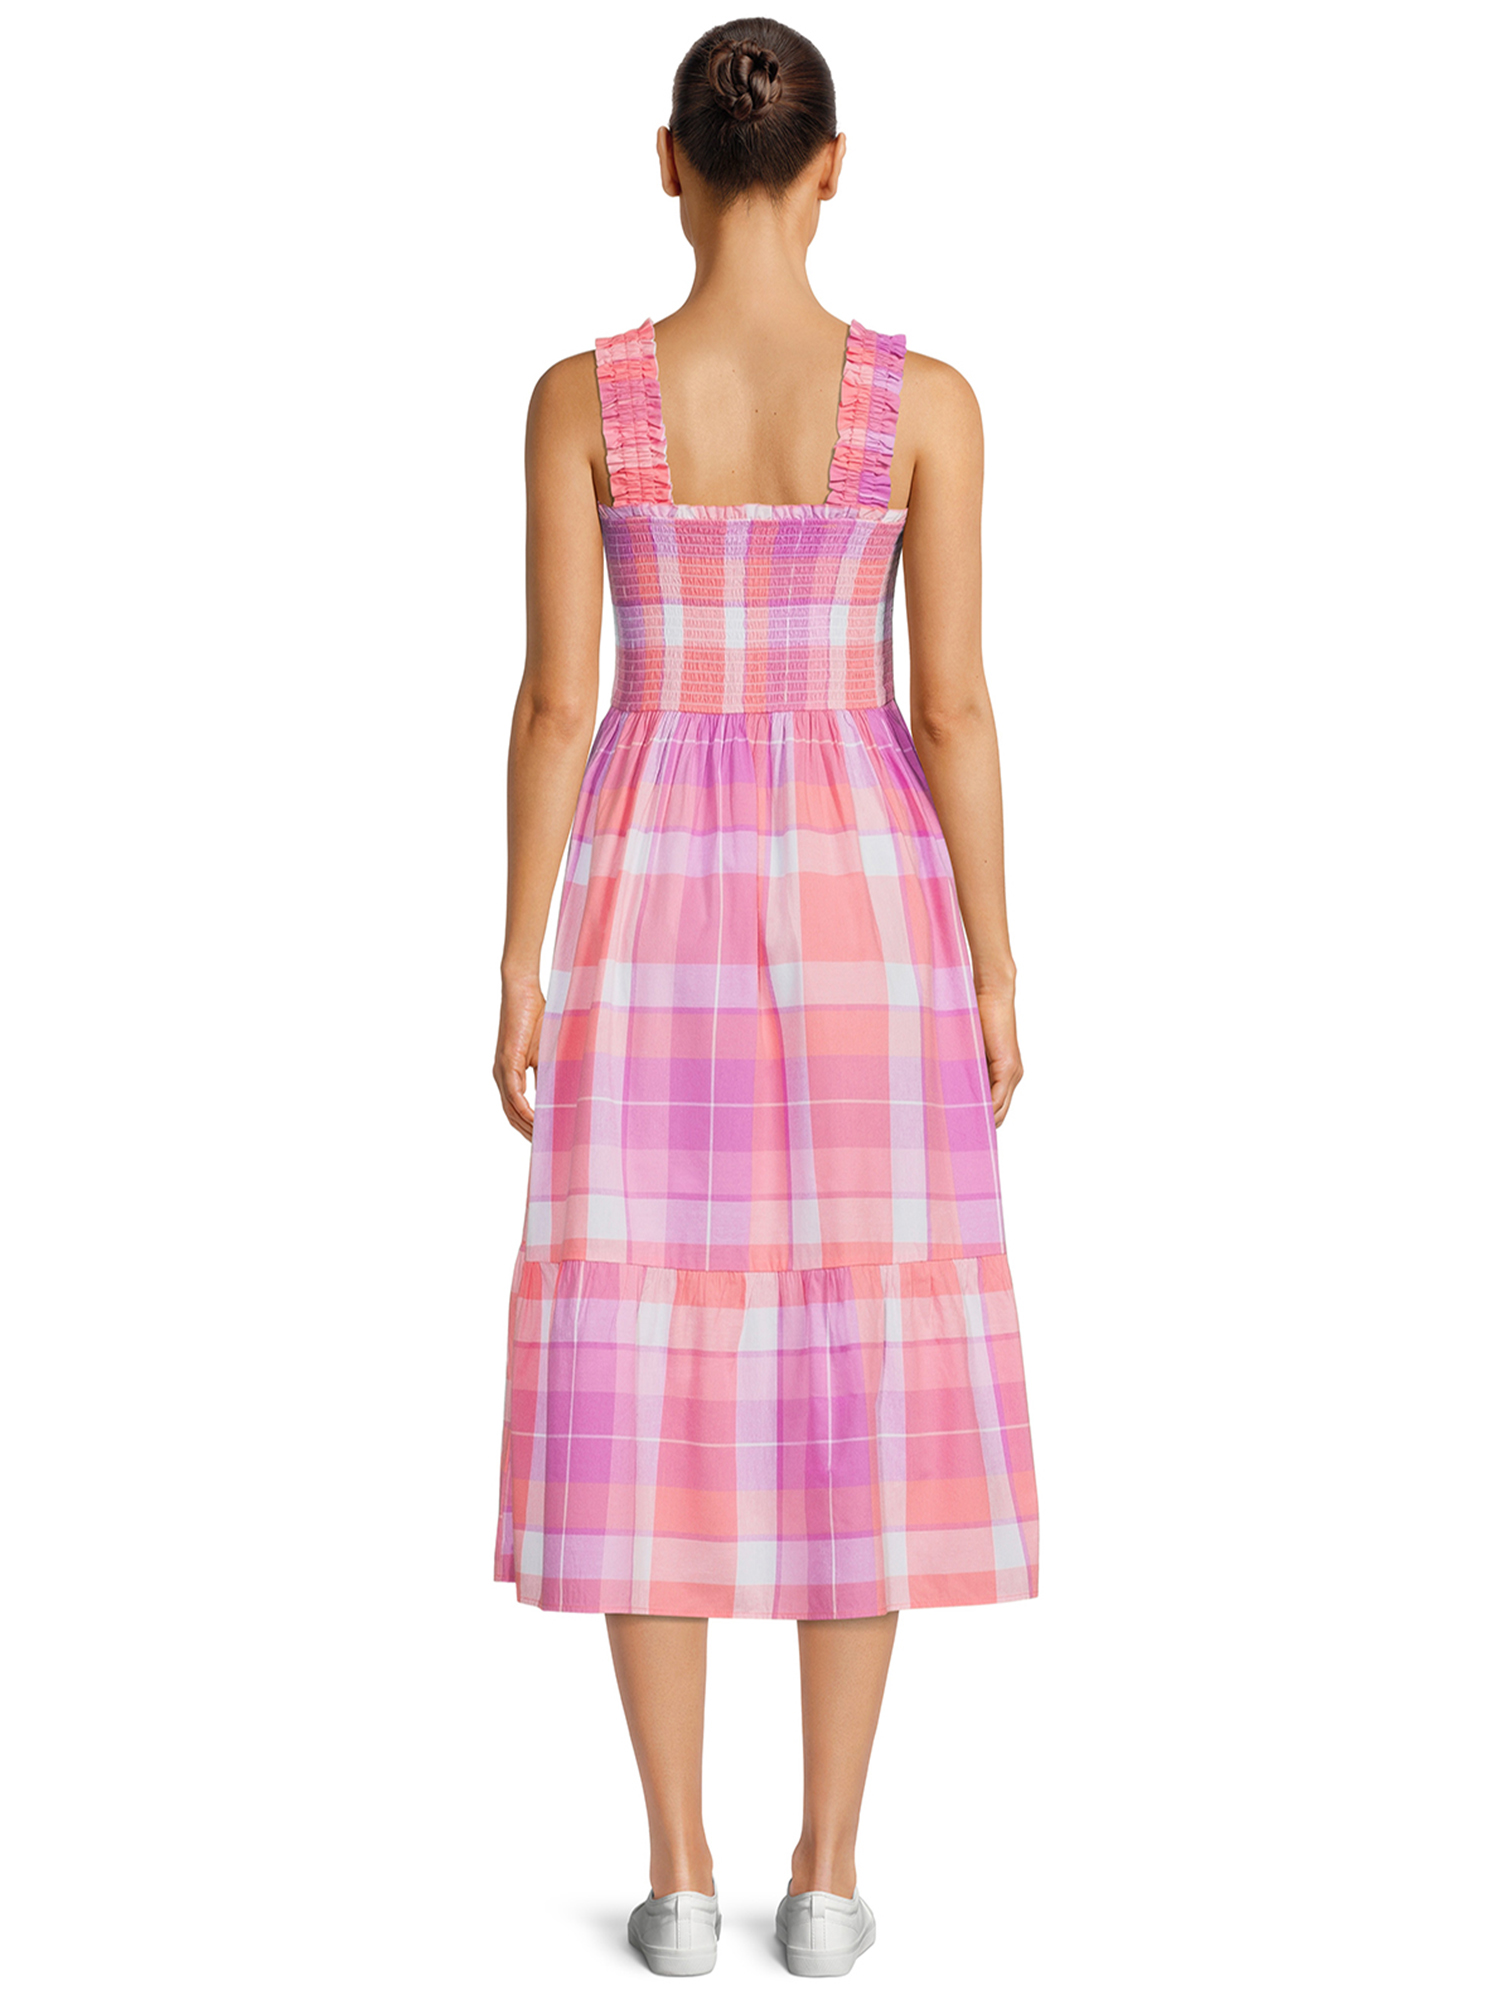 Time and Tru Women's Smocked Midi Dress with Ruffle Straps - image 3 of 5